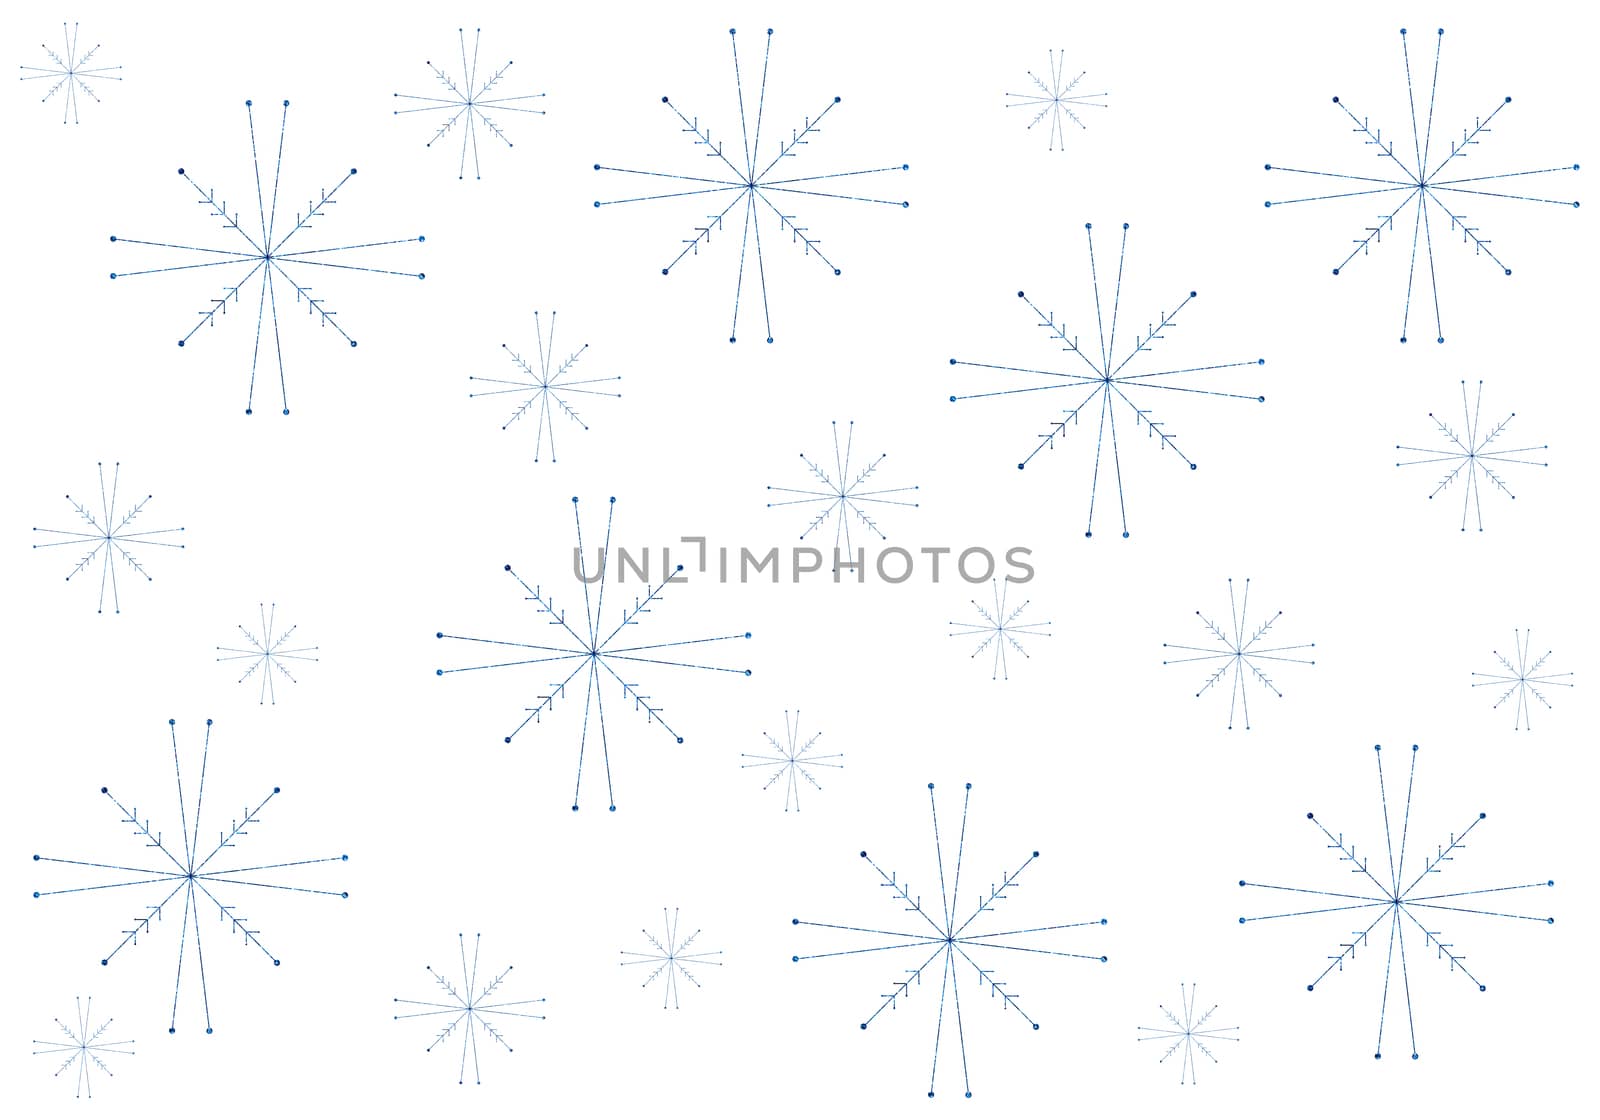 seasonal blue snowflakes background for winter